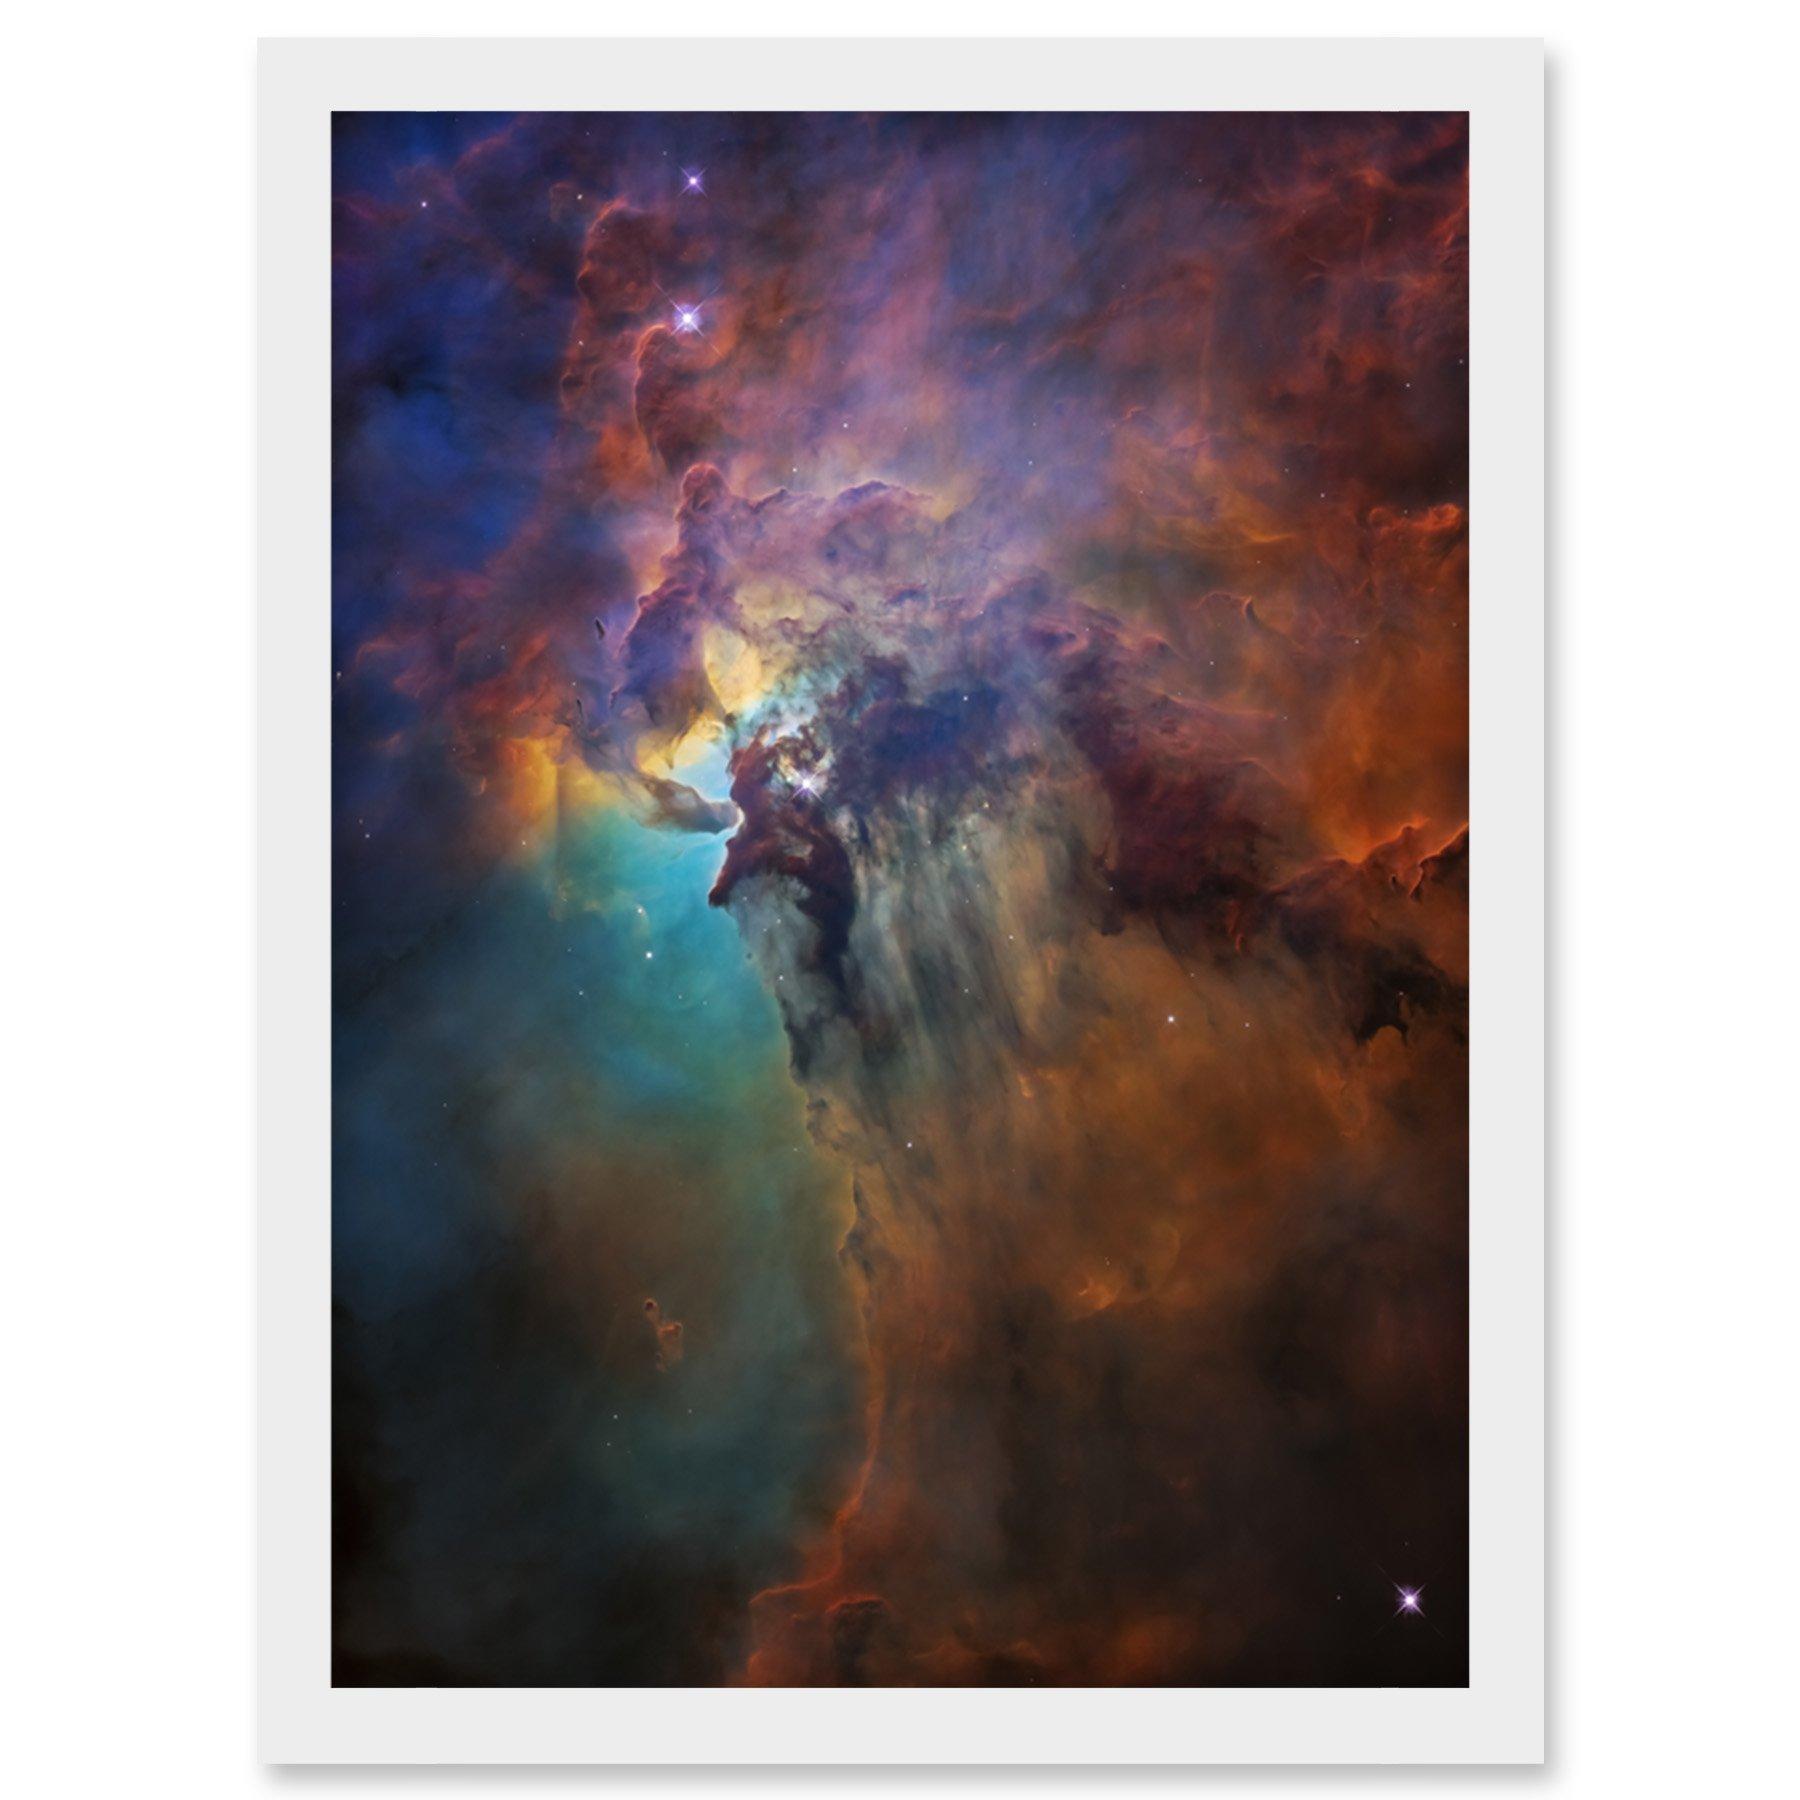 hubble space telescope image lagoon nebula visible light view of cosmic fantasy landscape herschel 36 giant star with gas dust cloud mountains art pri